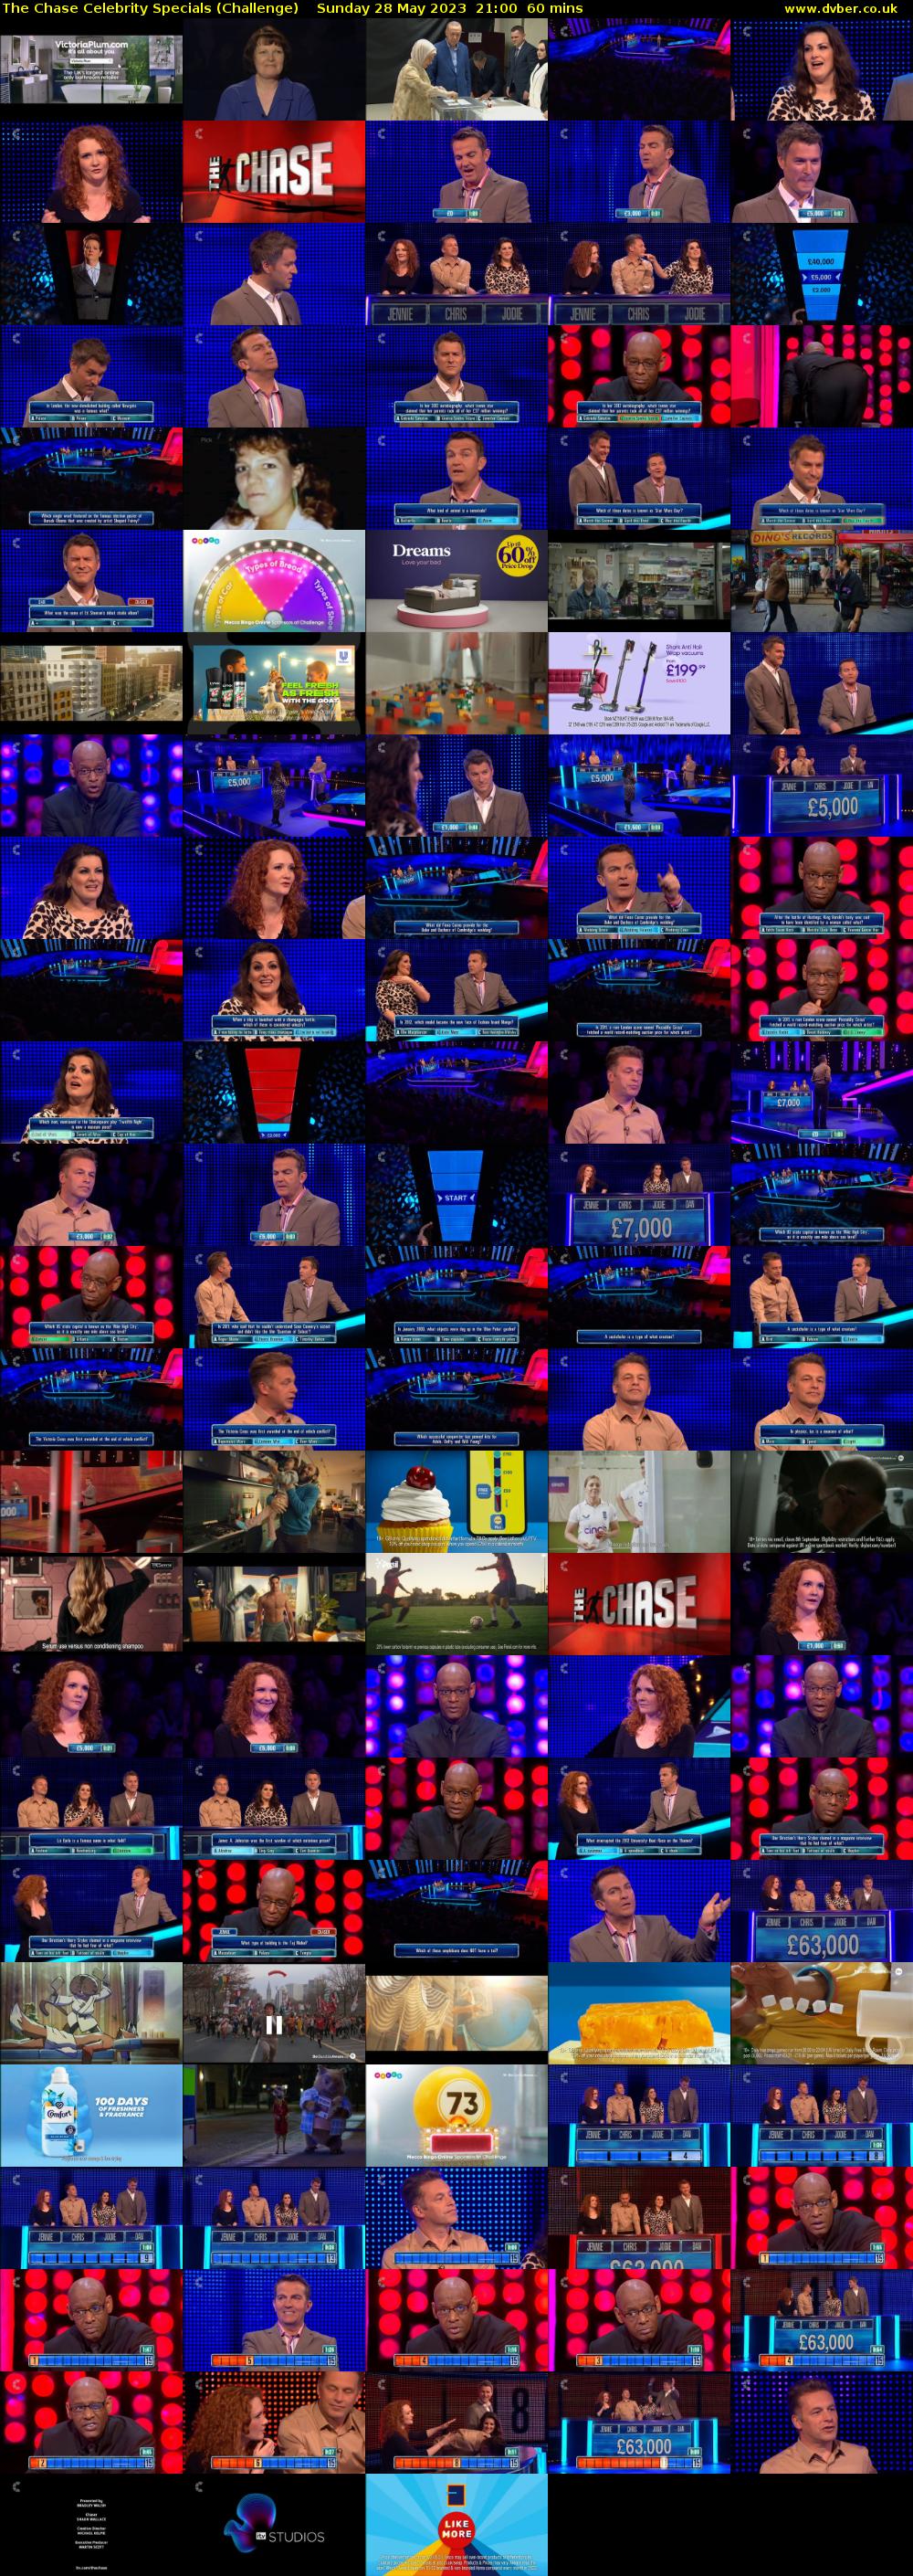 The Chase Celebrity Specials (Challenge) Sunday 28 May 2023 21:00 - 22:00